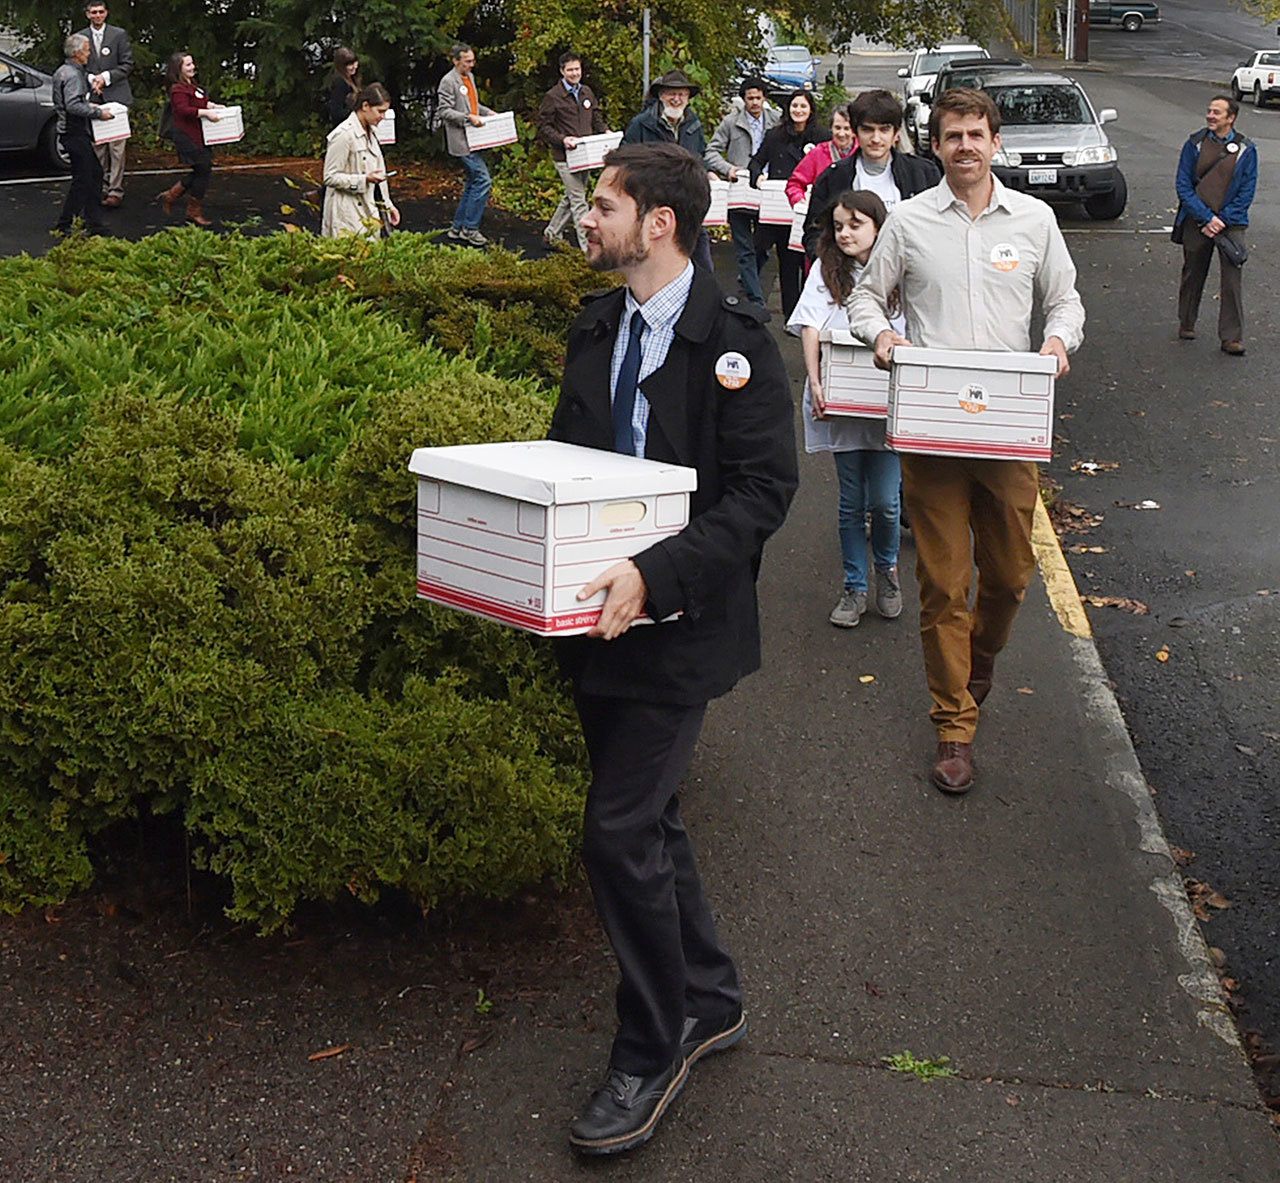 FILE - In this file photo taken Oct. 29, 2015, Carbon Washington campaign organizer Ben Silesky, left, leads a group of supporters and organization members into the Elections Office for the Washington Secretary of State in Olympia, Wash. to deliver signatures in support of putting Initiative 732 on the ballot. Voters in Washington state will weigh in on Initiative 732 in the 2016 election as they consider whether to approve the nation’s first direct carbon tax on the burning of fossil fuels. (Steve Bloom/The Olympian via AP, file)